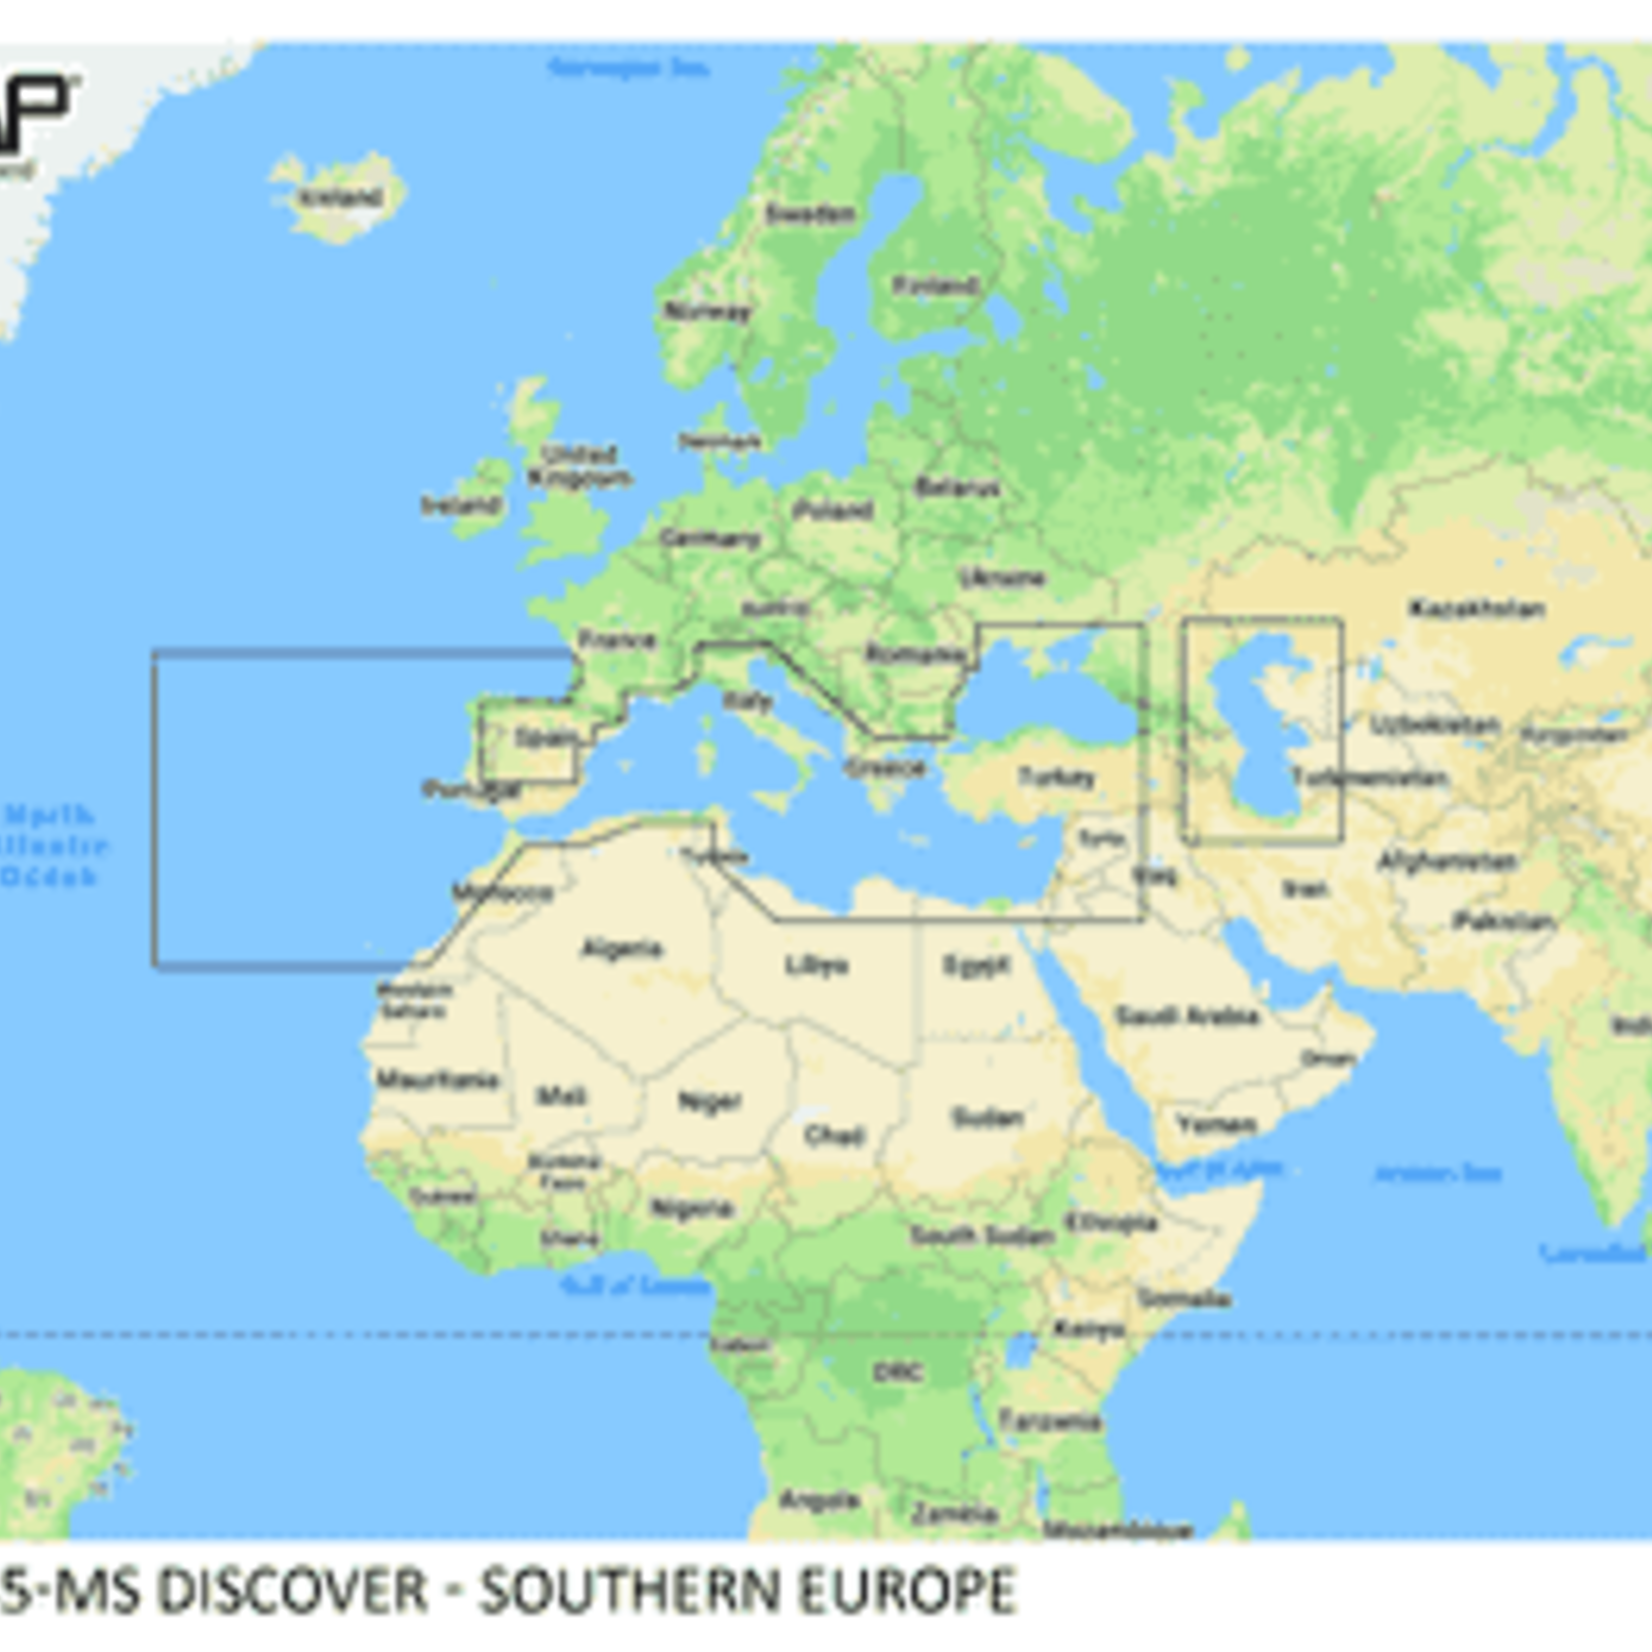 C-MAP DISCOVER - Southern Europe